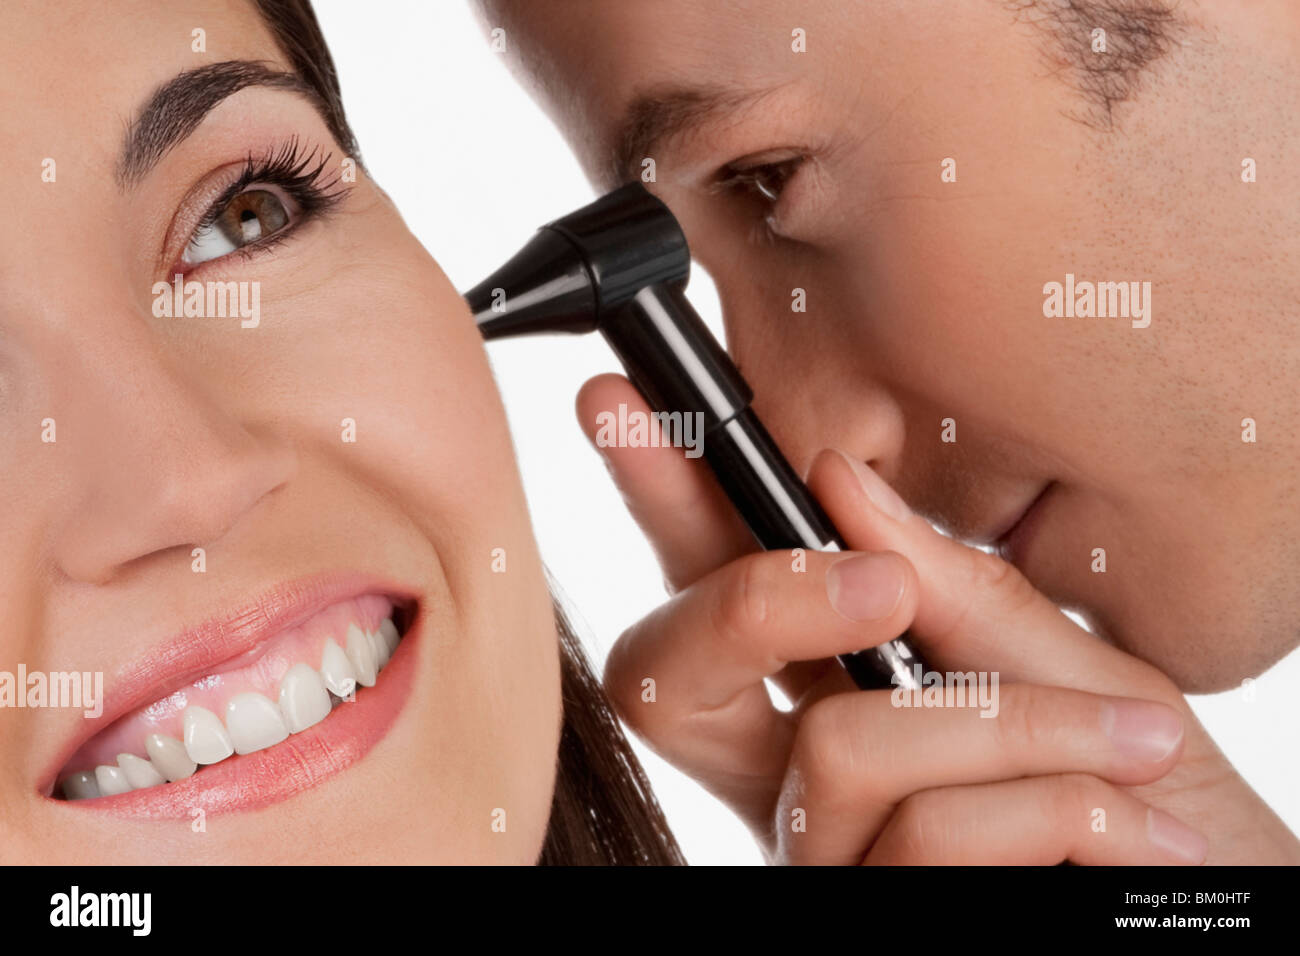 Doctor checking a woman's ear with an otoscope Stock Photo